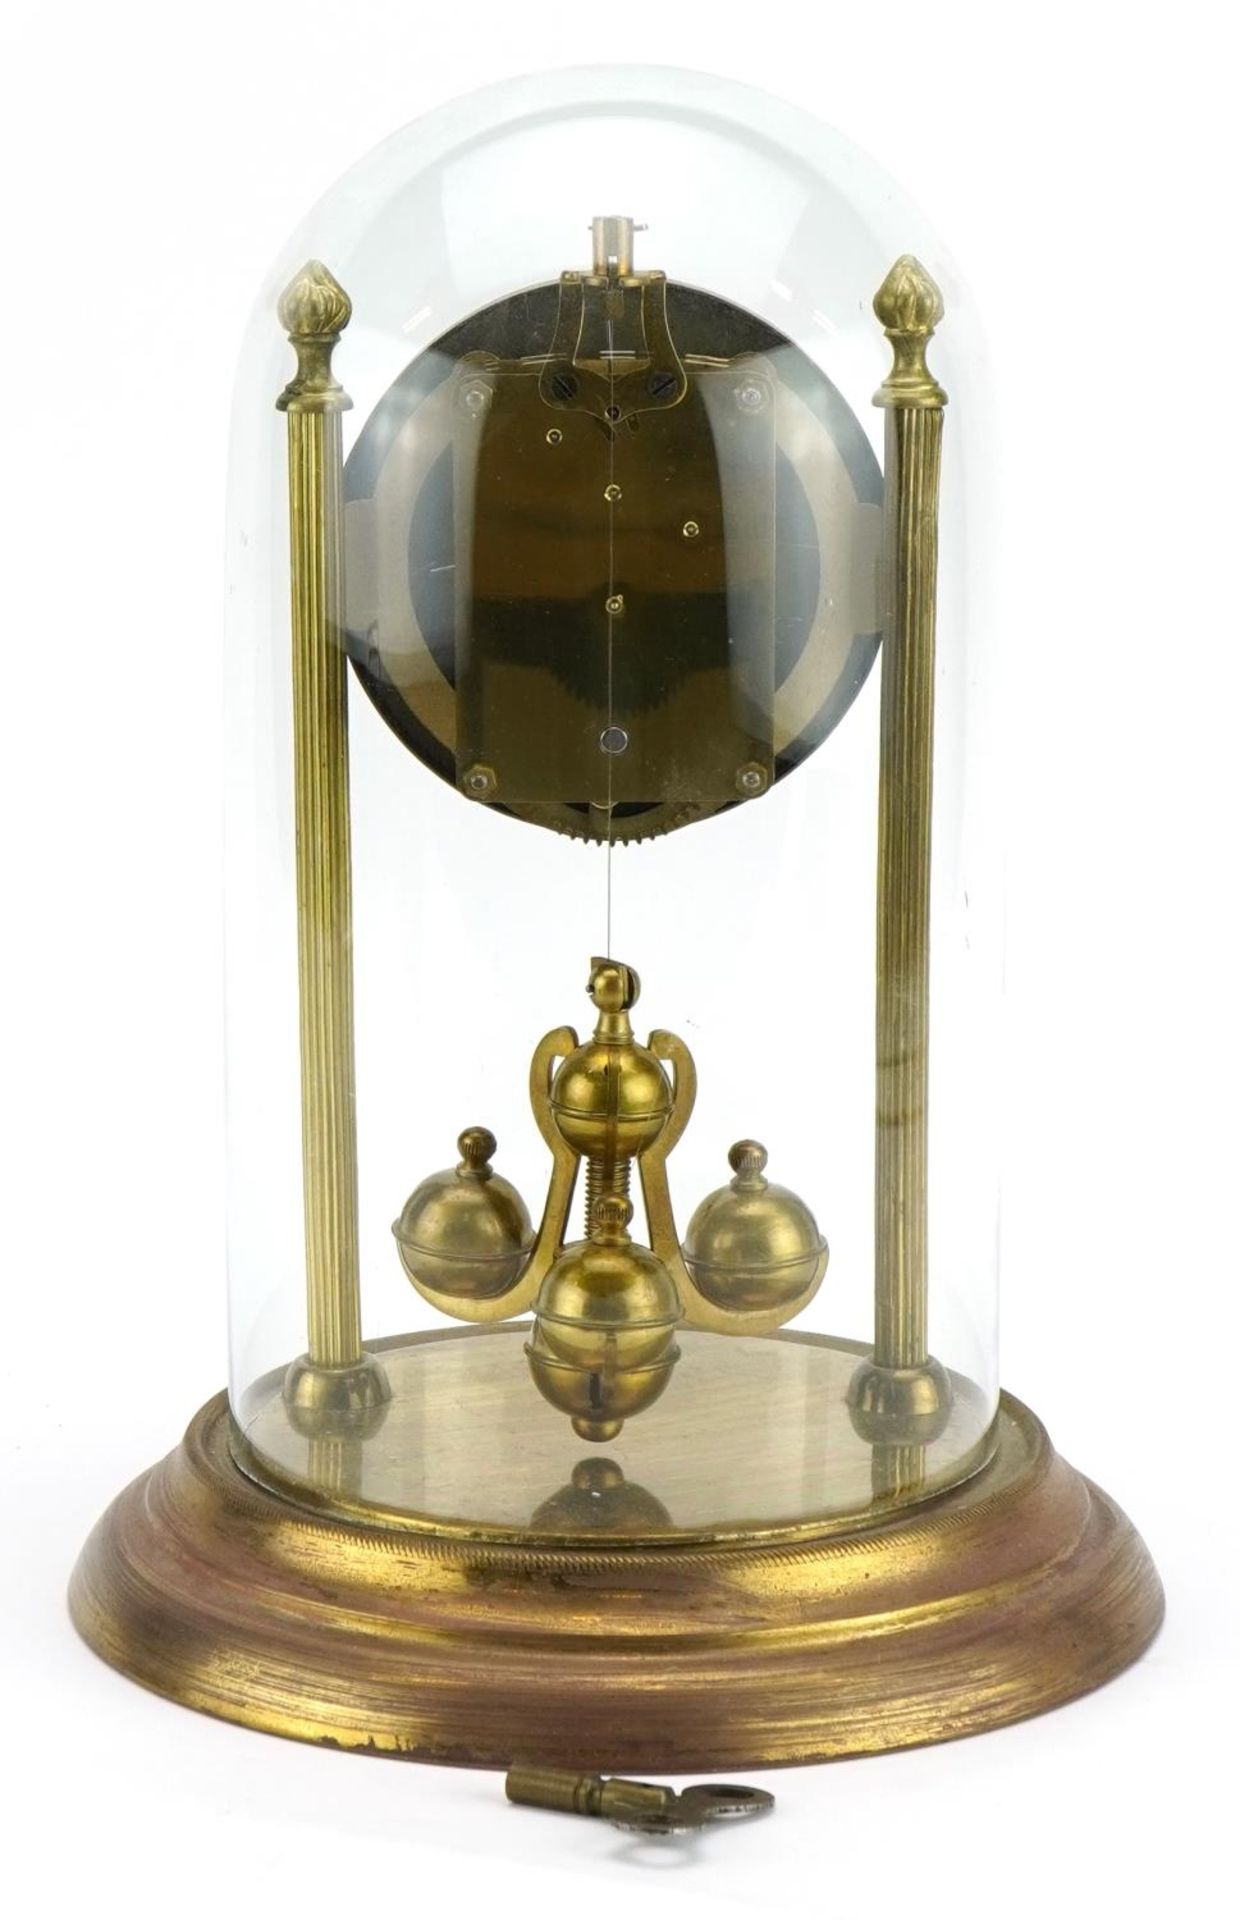 Brass anniversary clock under glass dome. 28cm high - Image 3 of 3